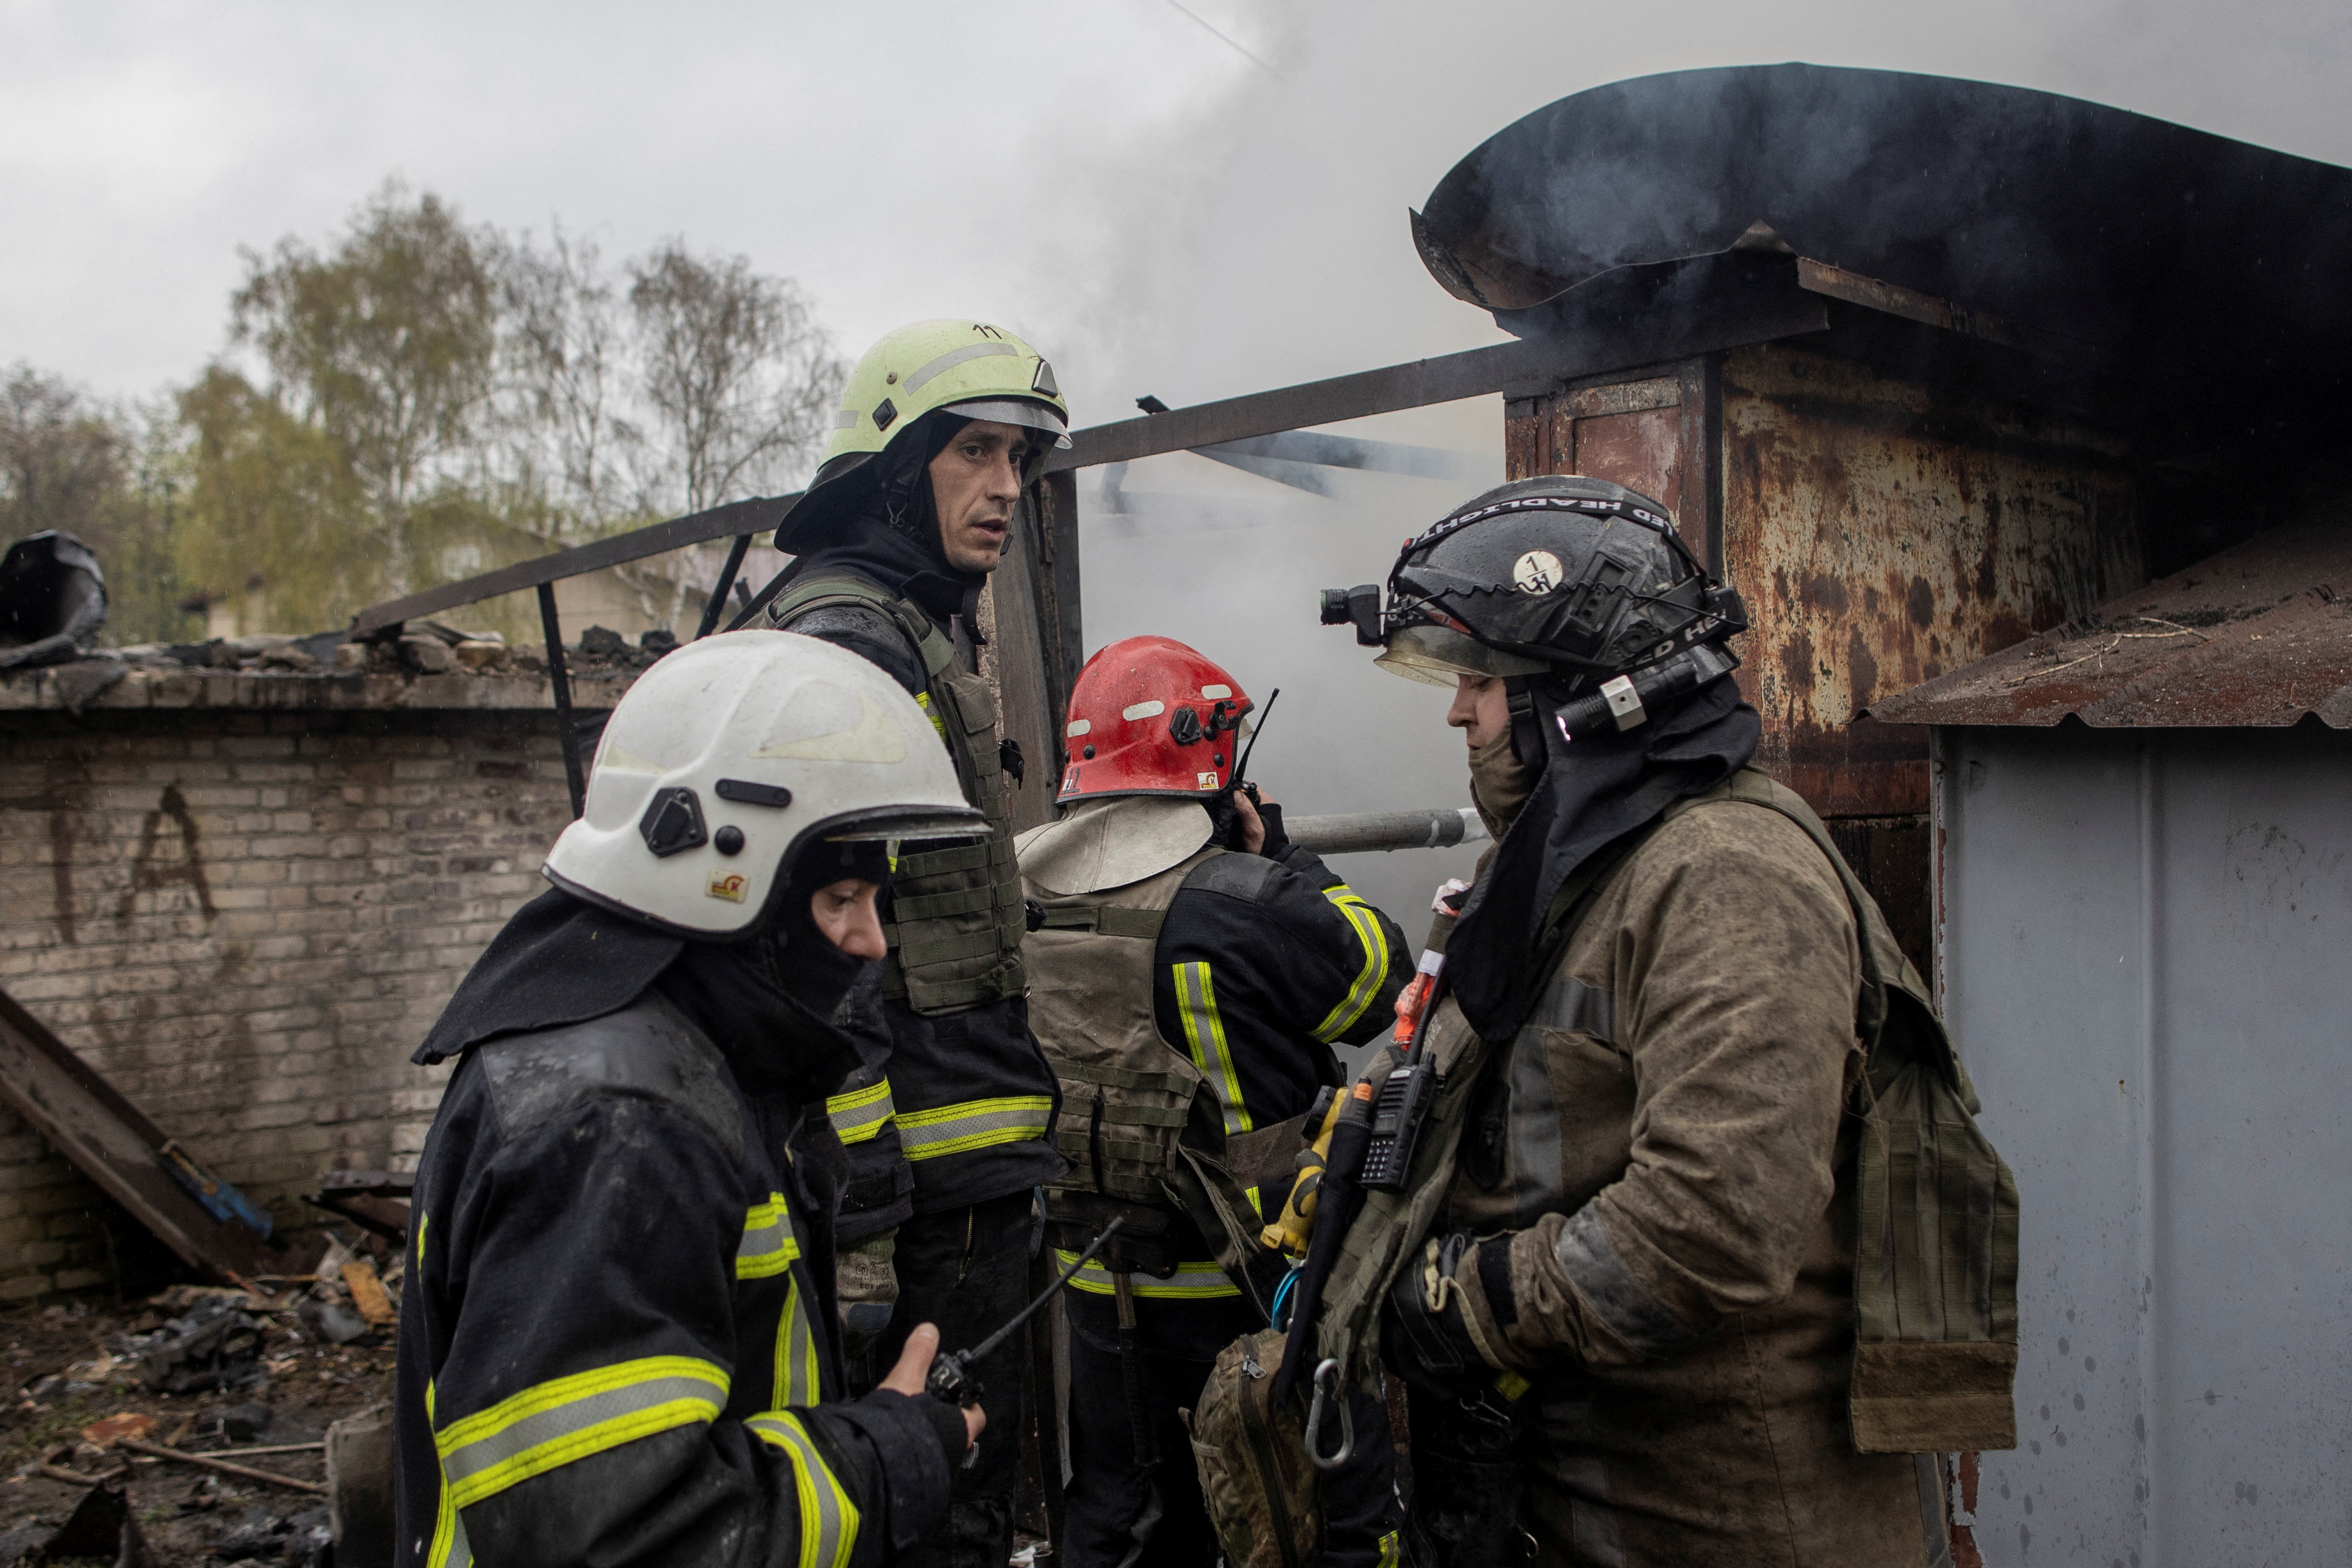 Firefighters try to extinguish a fire burning at a garage in Kharkiv, Ukraine, on April 18.